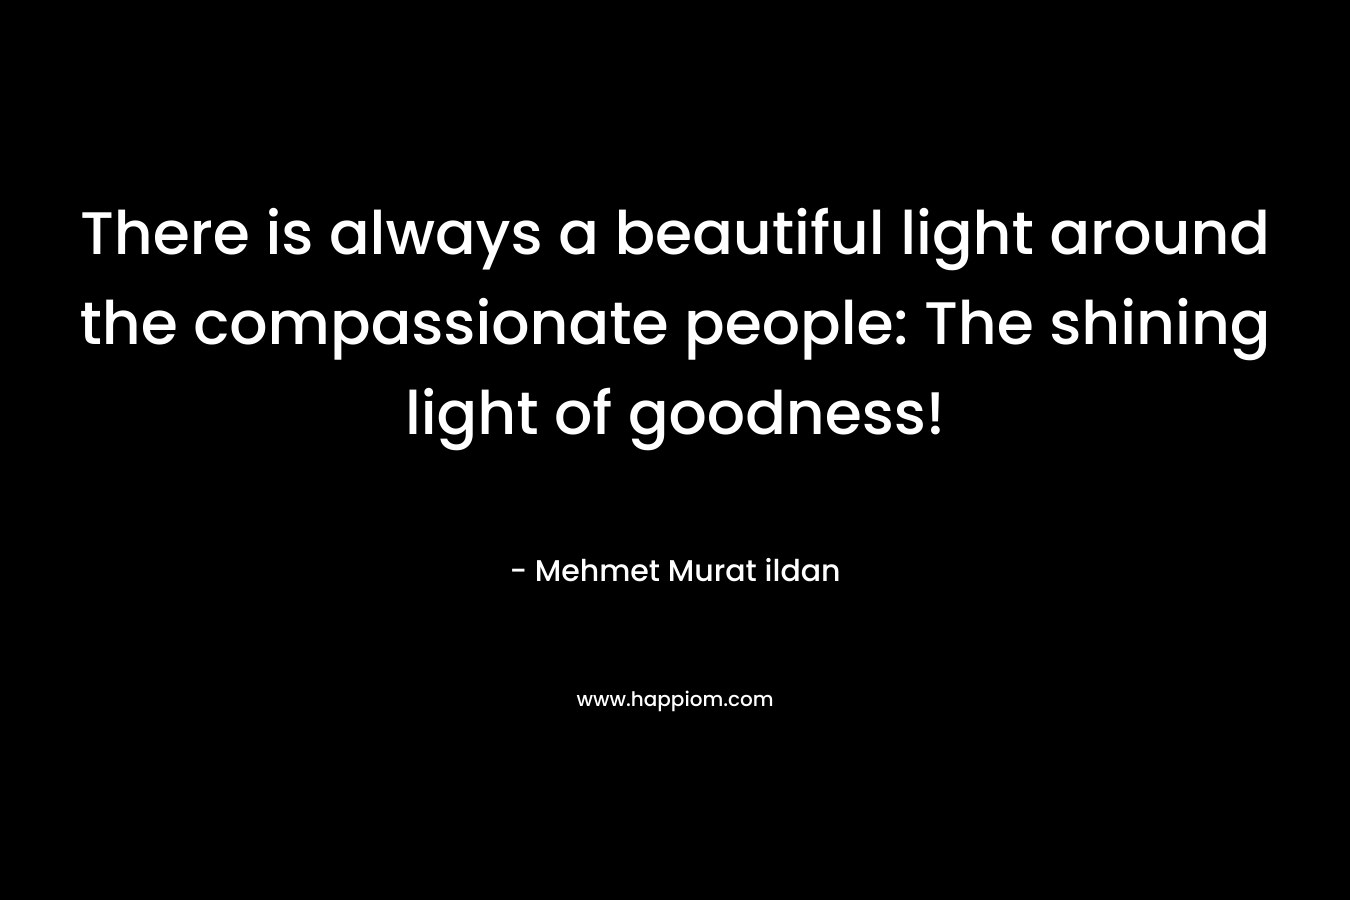 There is always a beautiful light around the compassionate people: The shining light of goodness!